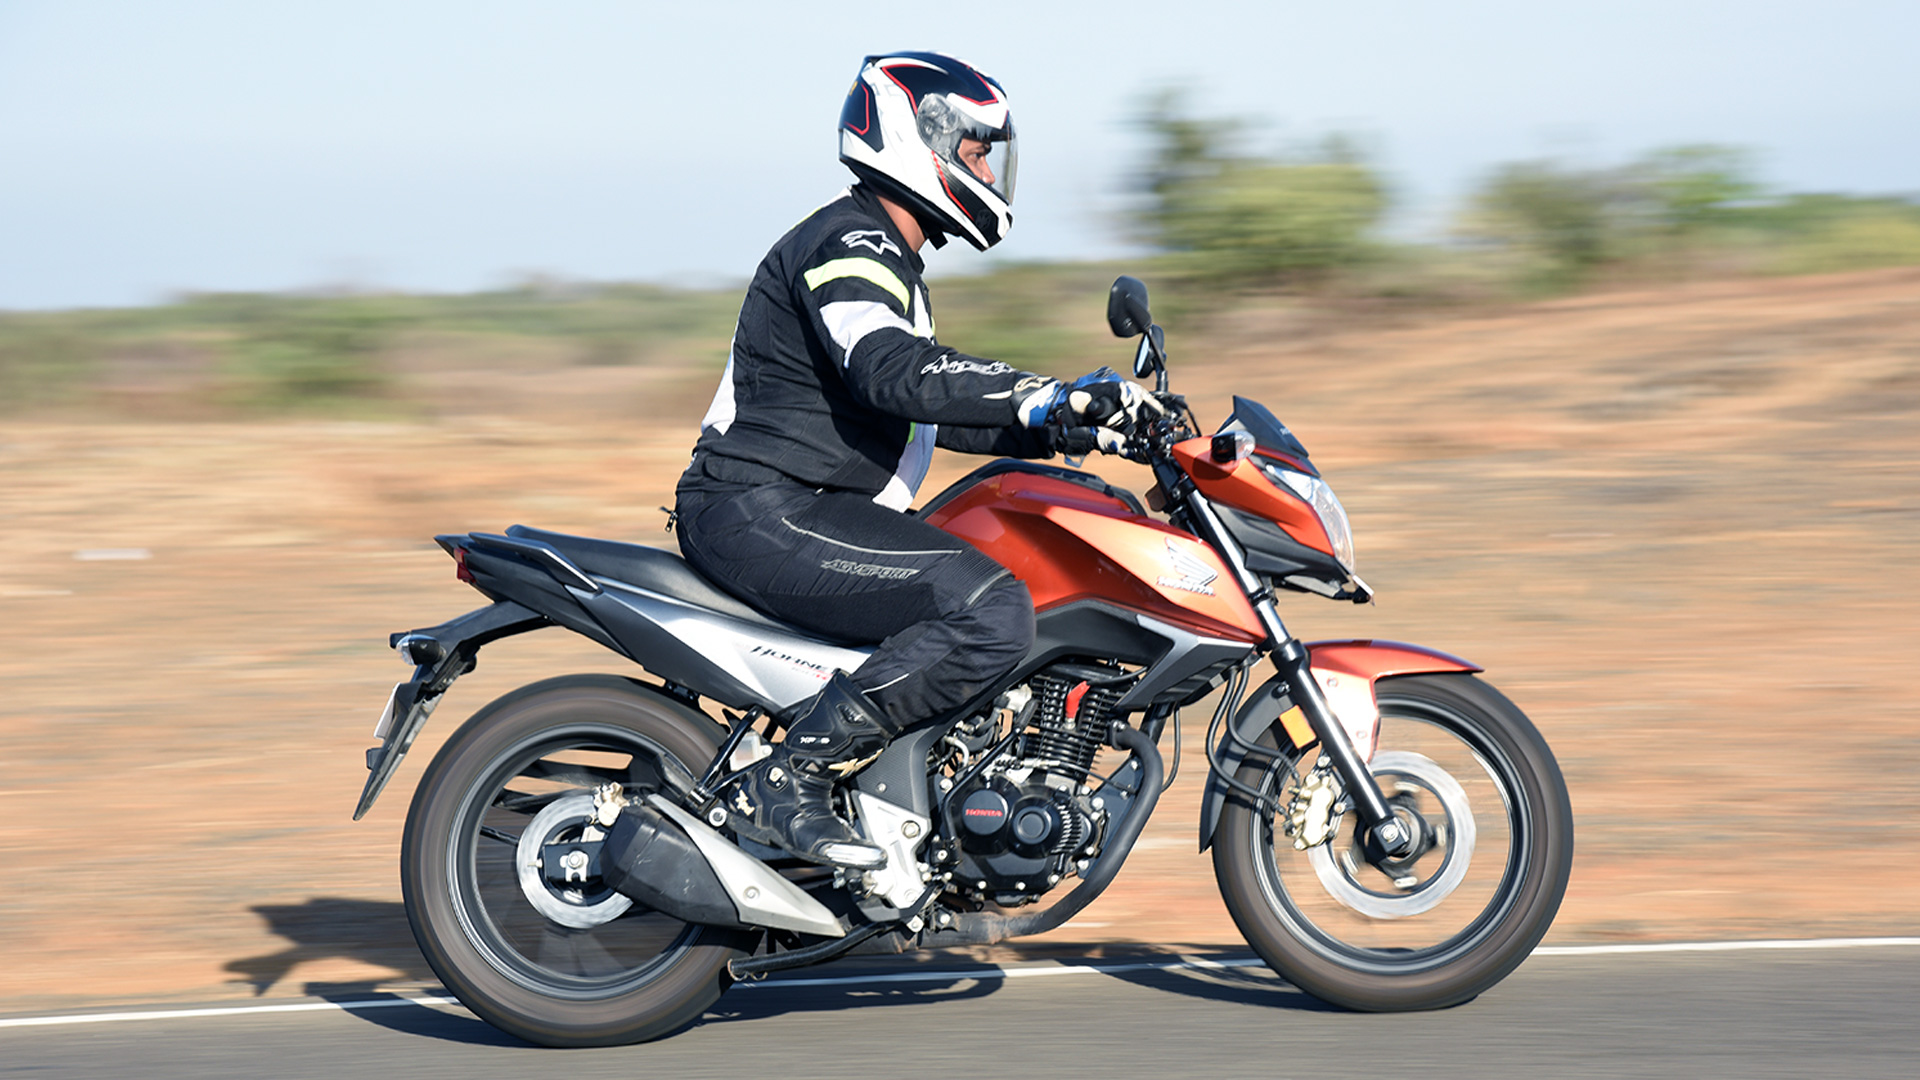 Honda Cb Hornet 160r 16 Cbs Price Mileage Reviews Specification Gallery Overdrive